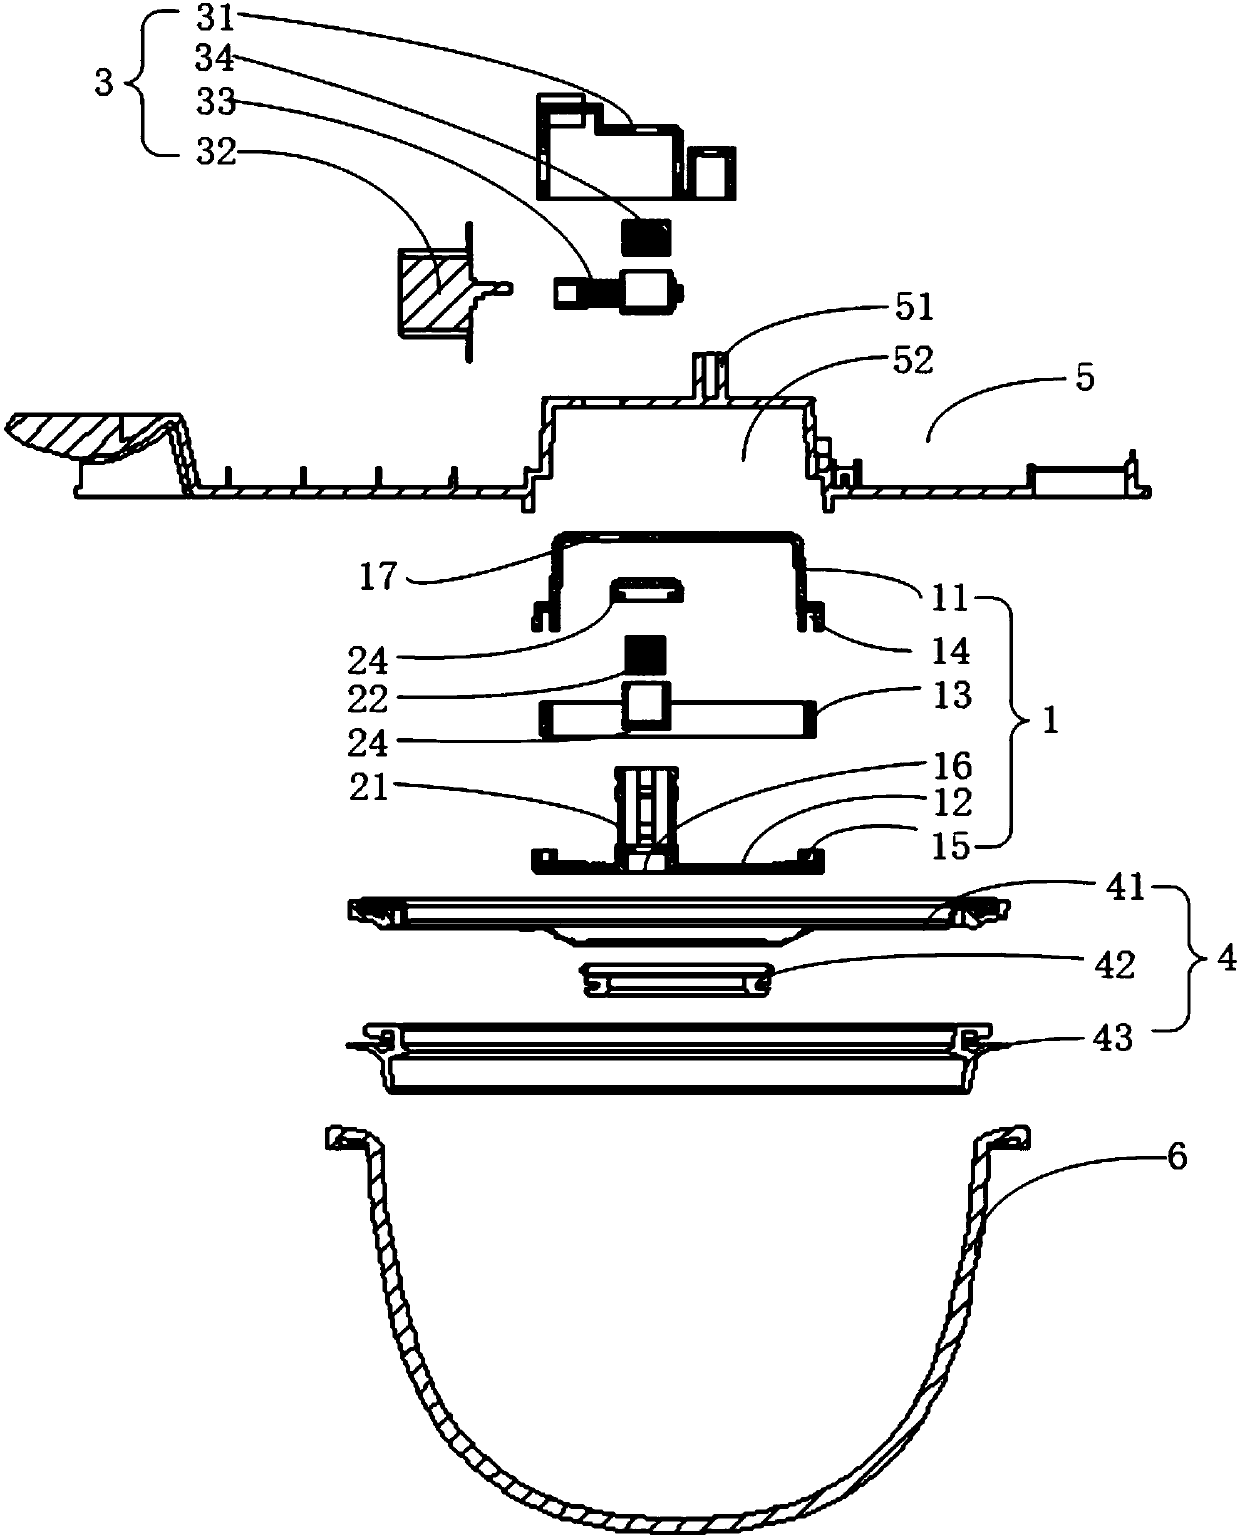 Magnetic-suspension stepless pressure-regulation control device and cooking utensil